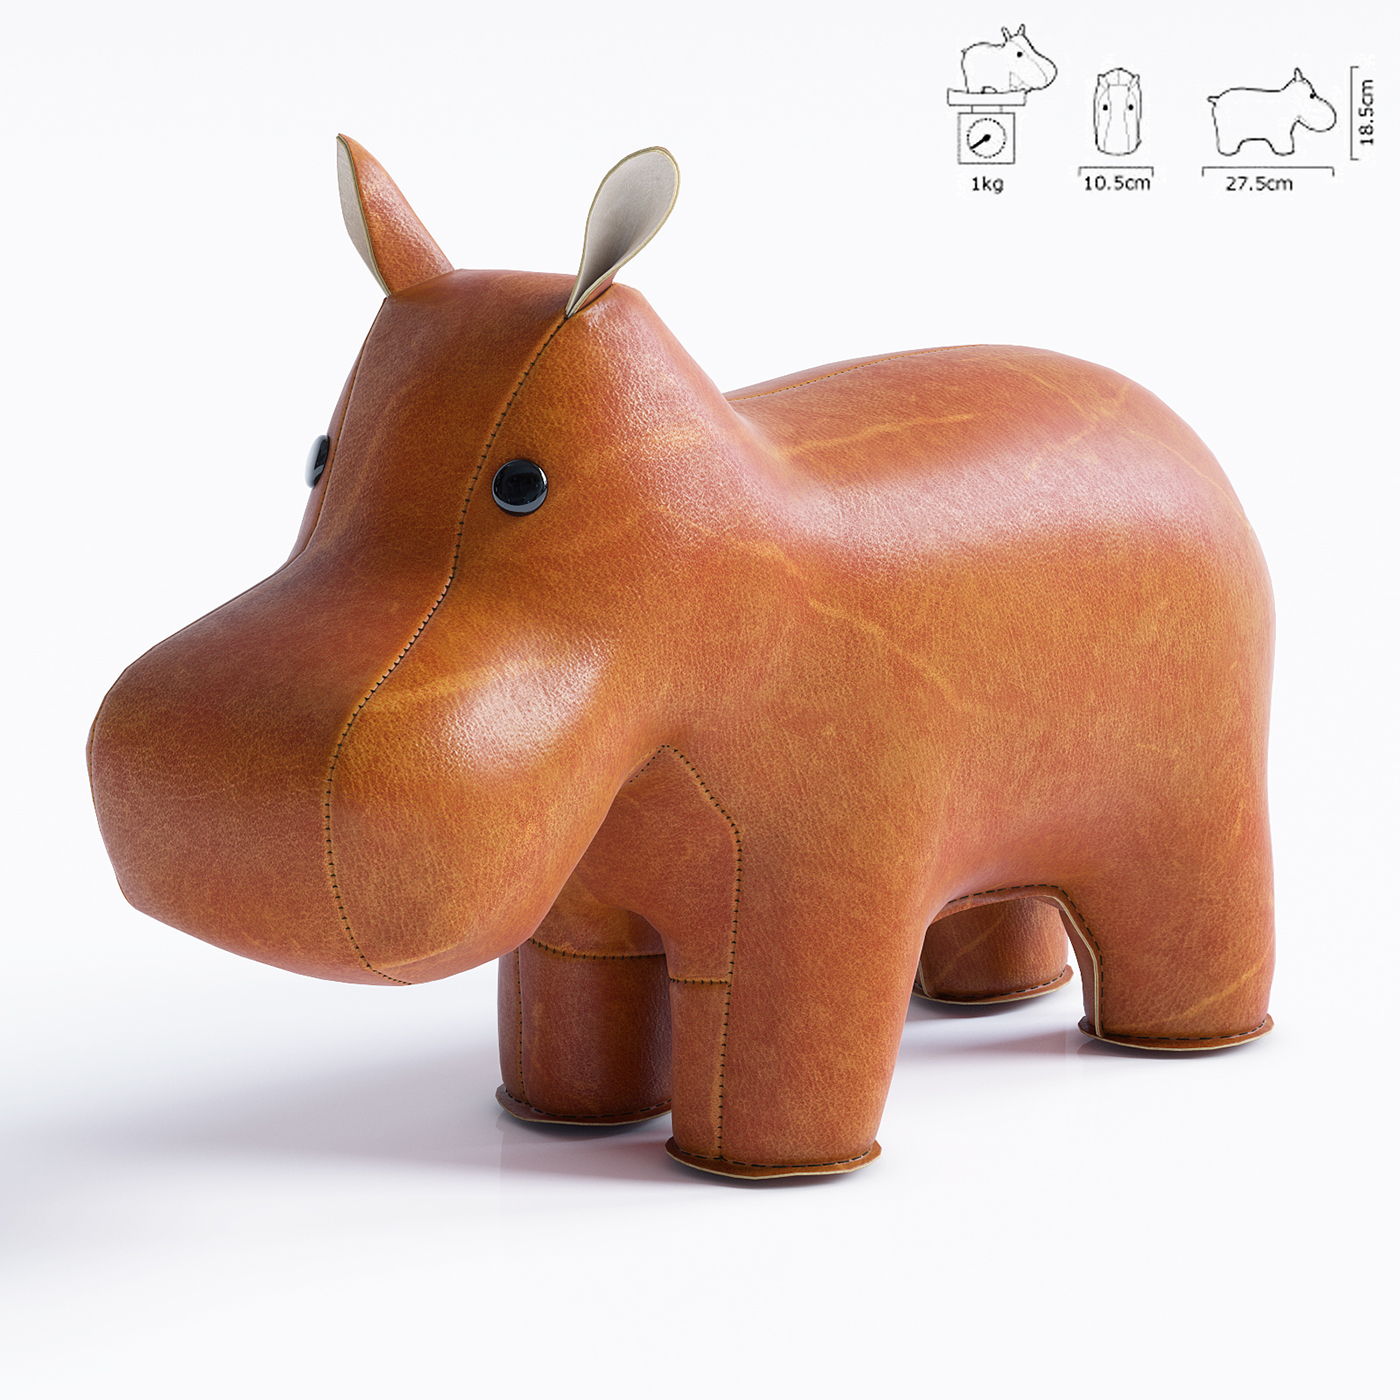 Zuny - Classic Hippo Bookend on Behance